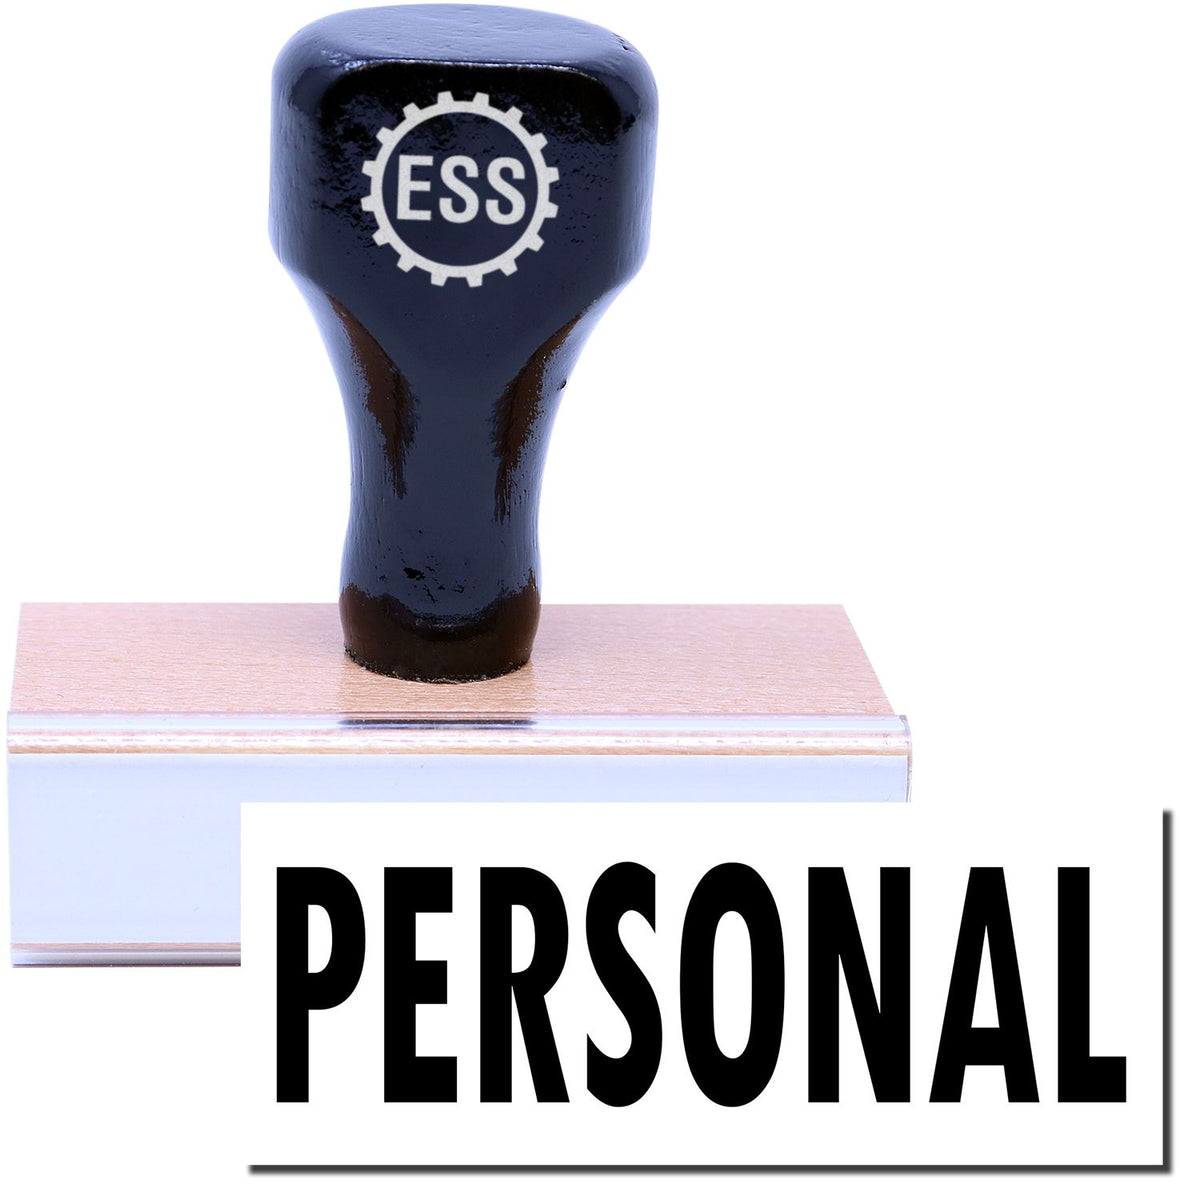 A stock office rubber stamp with a stamped image showing how the text &quot;PERSONAL&quot; in a large font is displayed after stamping.